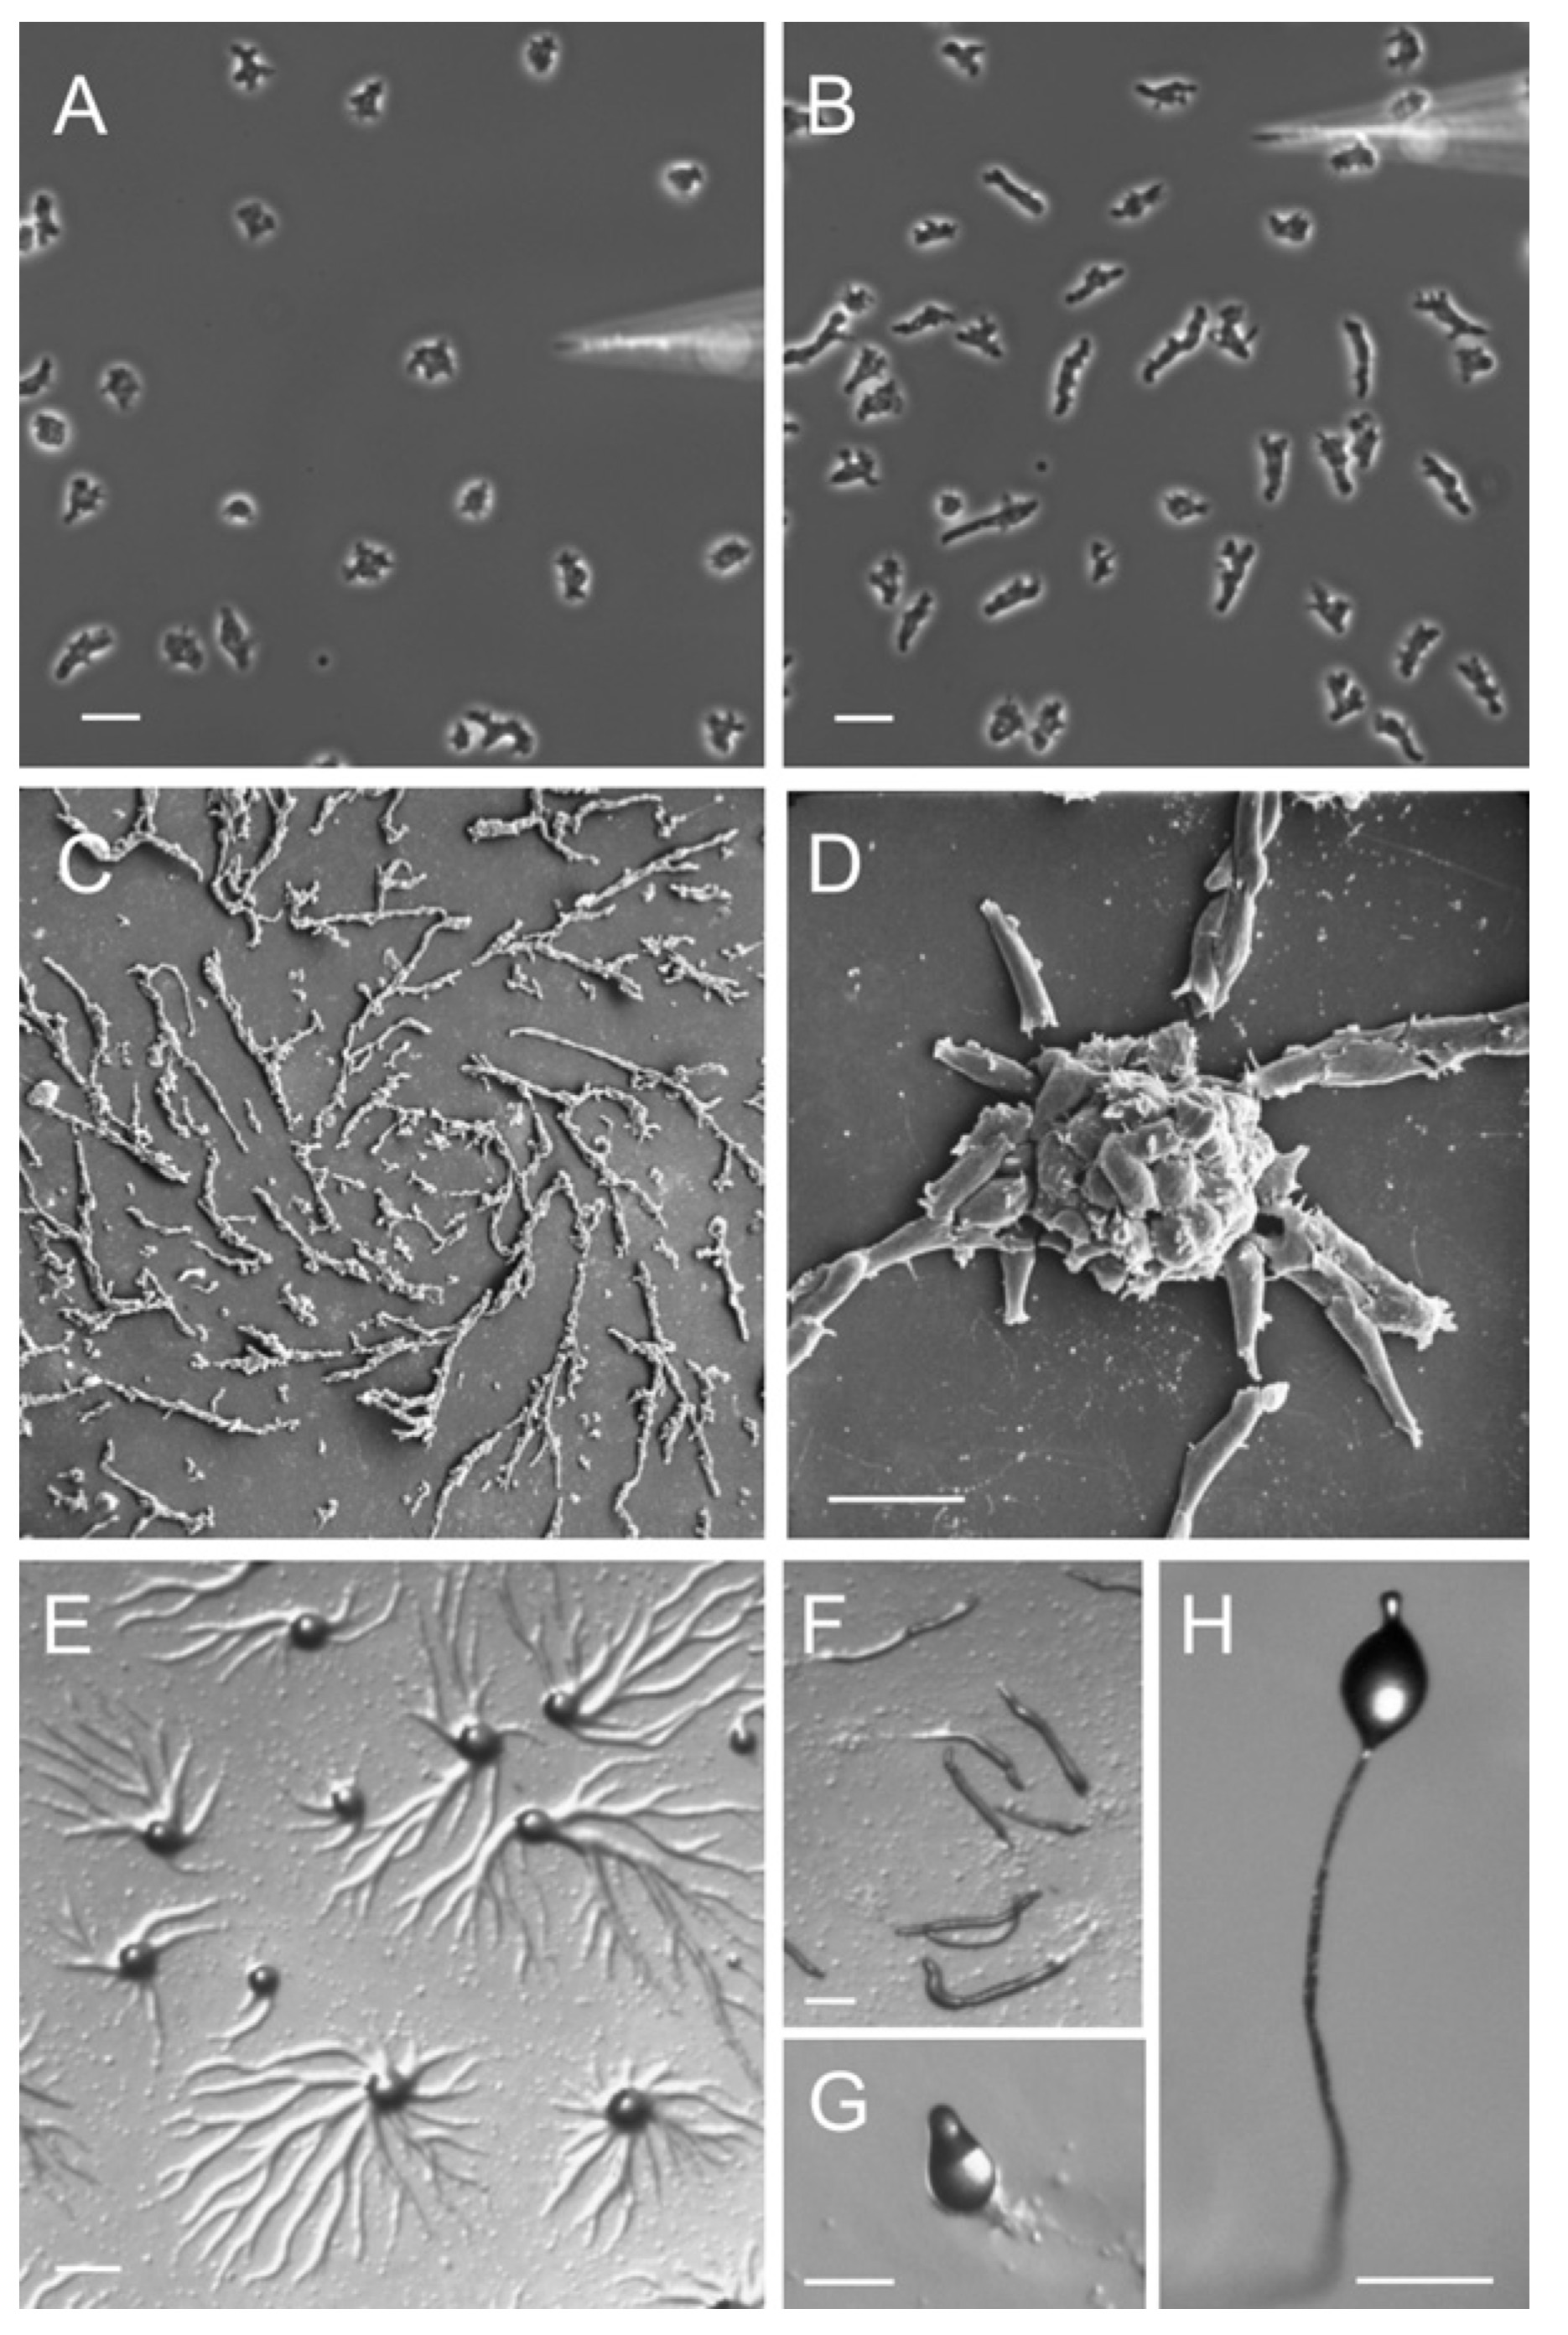 Stages of Dictyostelium lifecycle. (A - B) Dictyostelium cells chemotaxing toward cAMP released from a micropipette. Cells that have not yet sensed cAMP are shown in (A). Within 1 or 2 min the cells polarize and migrate toward the source of chemoattractant (B). (C - D) Scanning electron micrograph of streaming Dictyostelium cells (C) and the formation of aggregates (D). (E) Formation of aggregation centers on an agar plate. (F) Slugs moving on an agar plate. (G) Culmination stage. (H) Fruiting body. Figure from Müller-Taubergen et al. 2012